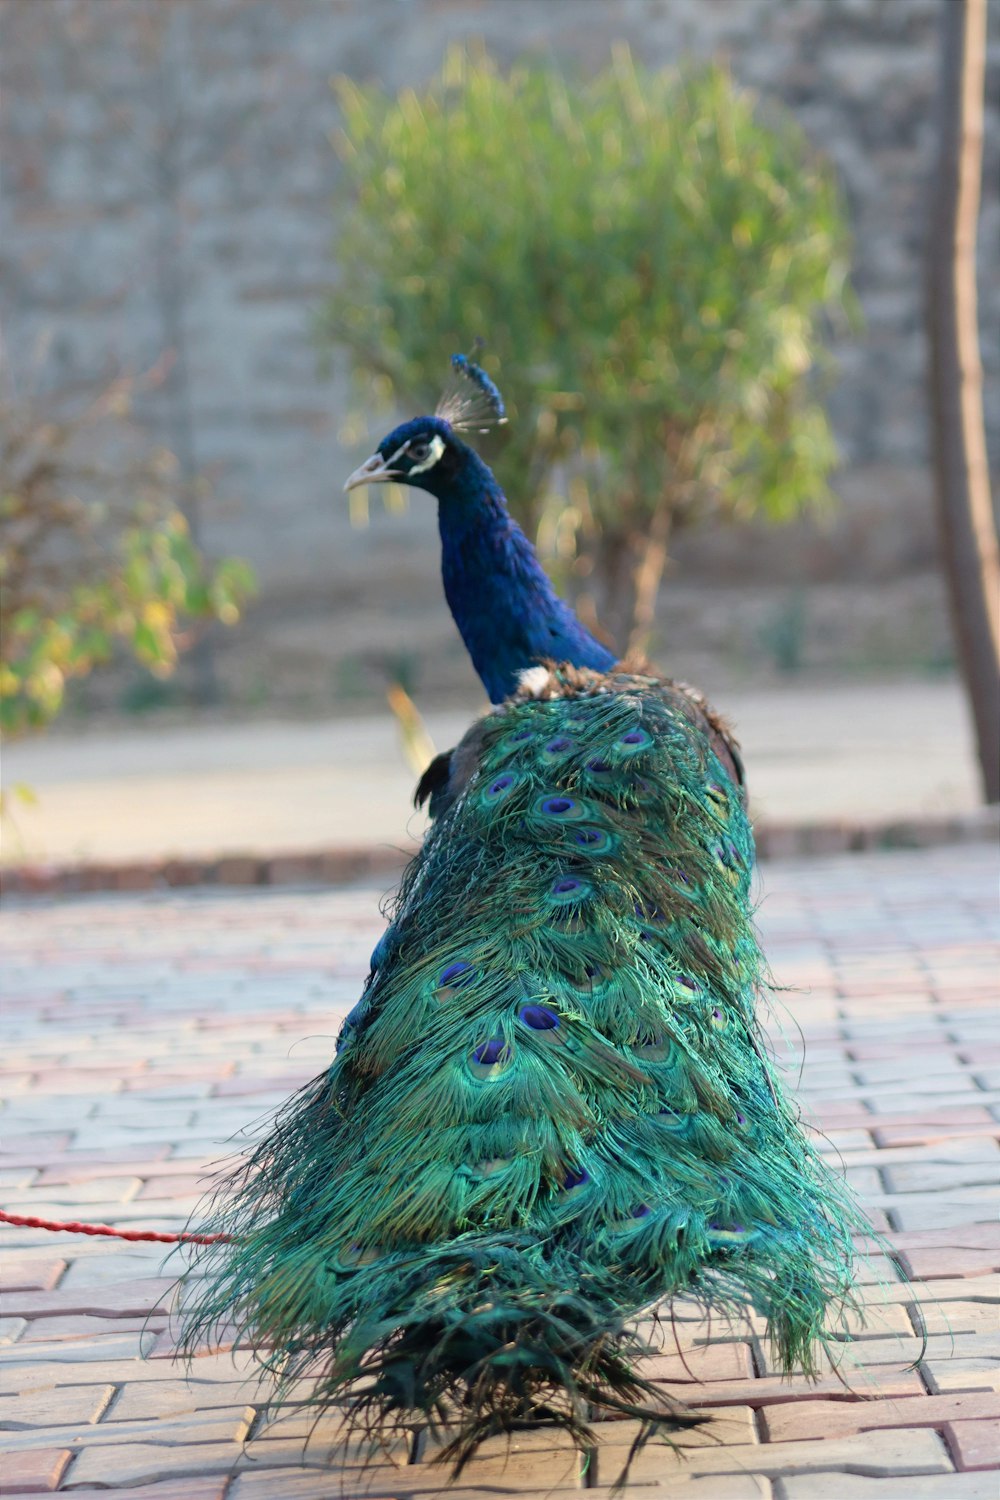 a peacock standing on top of a brick walkway